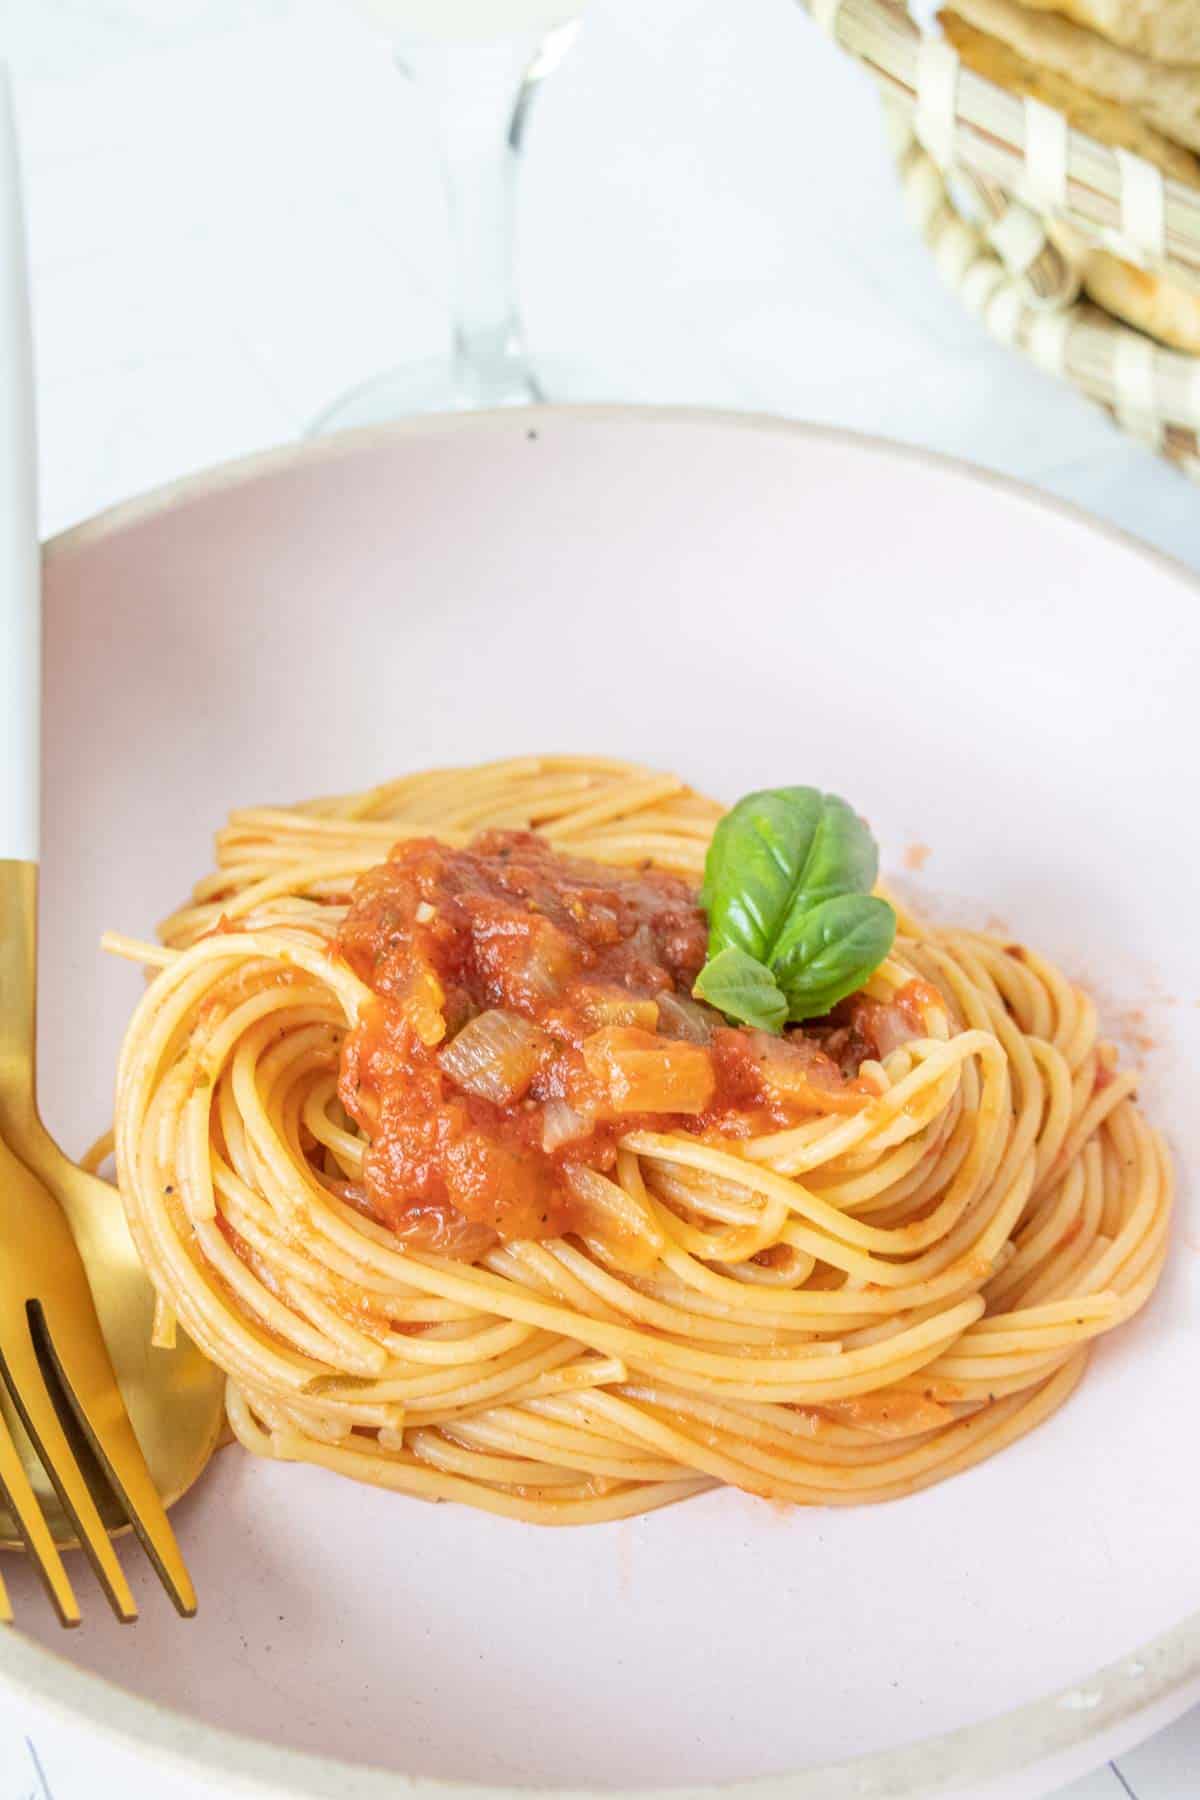 Spaghetti with tomato sauce on a pink plate with a fork.